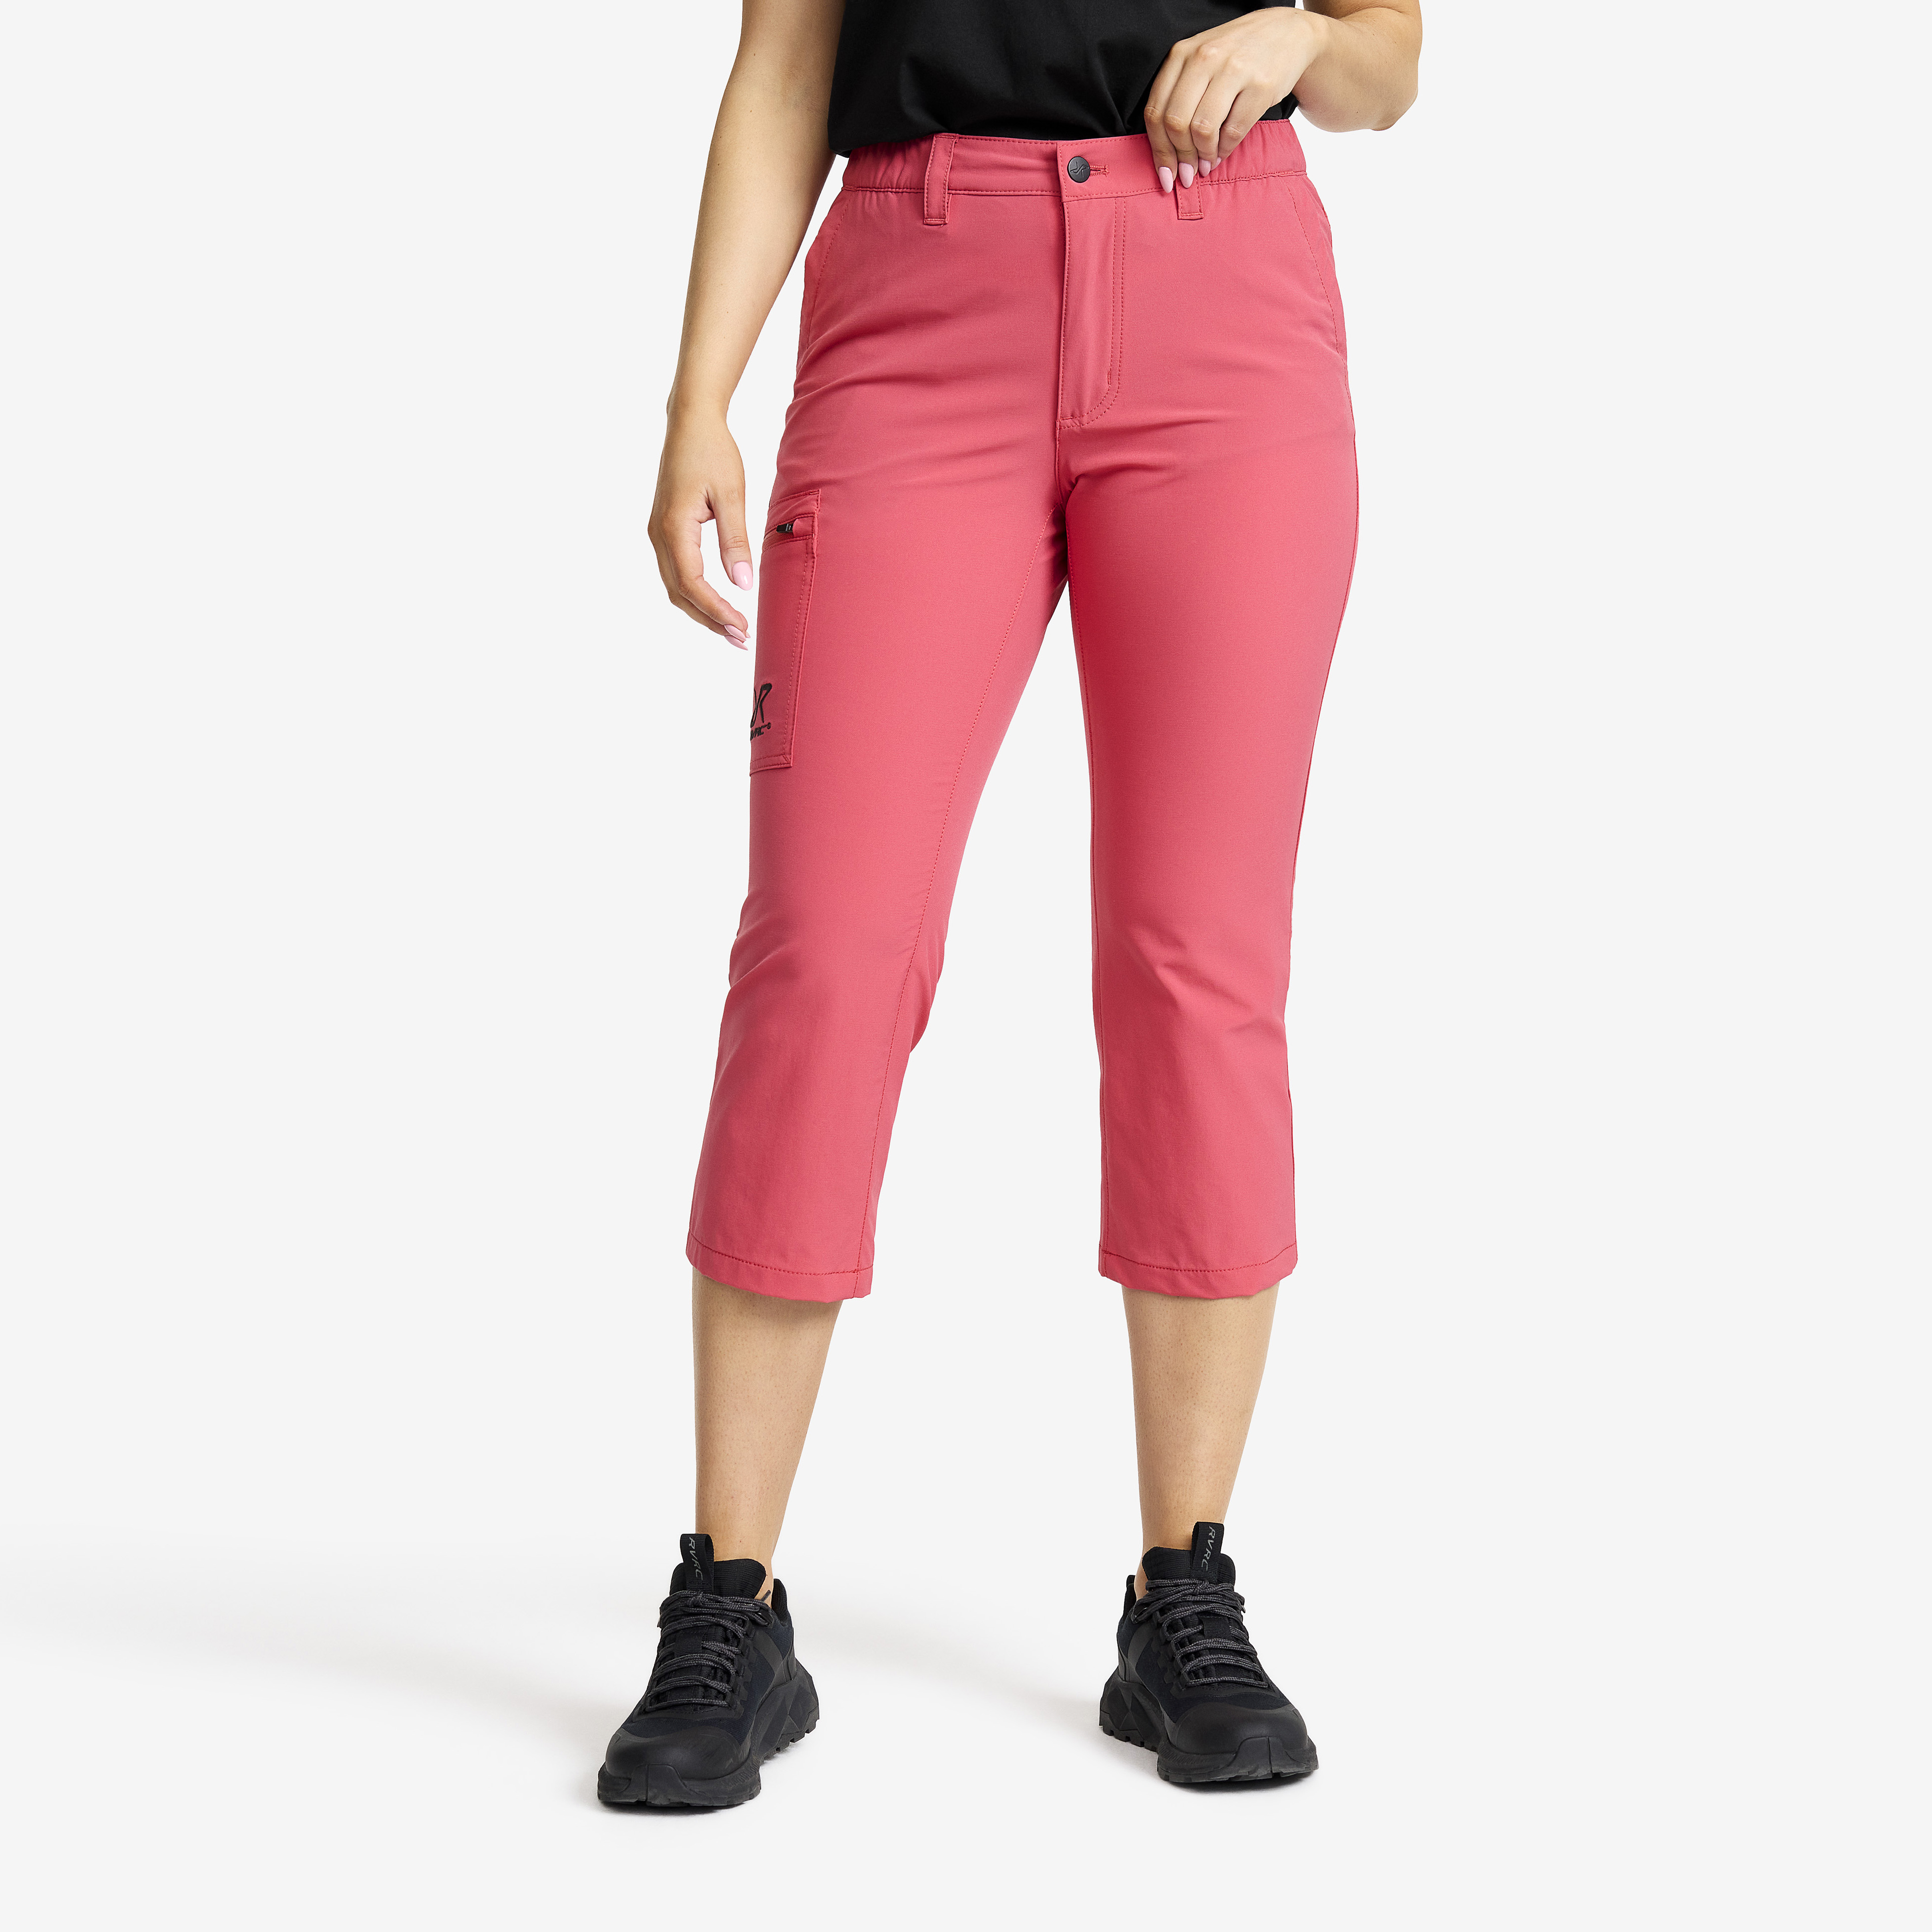 Loyal 3/4 Stretch Pants Holly Berry Naiset